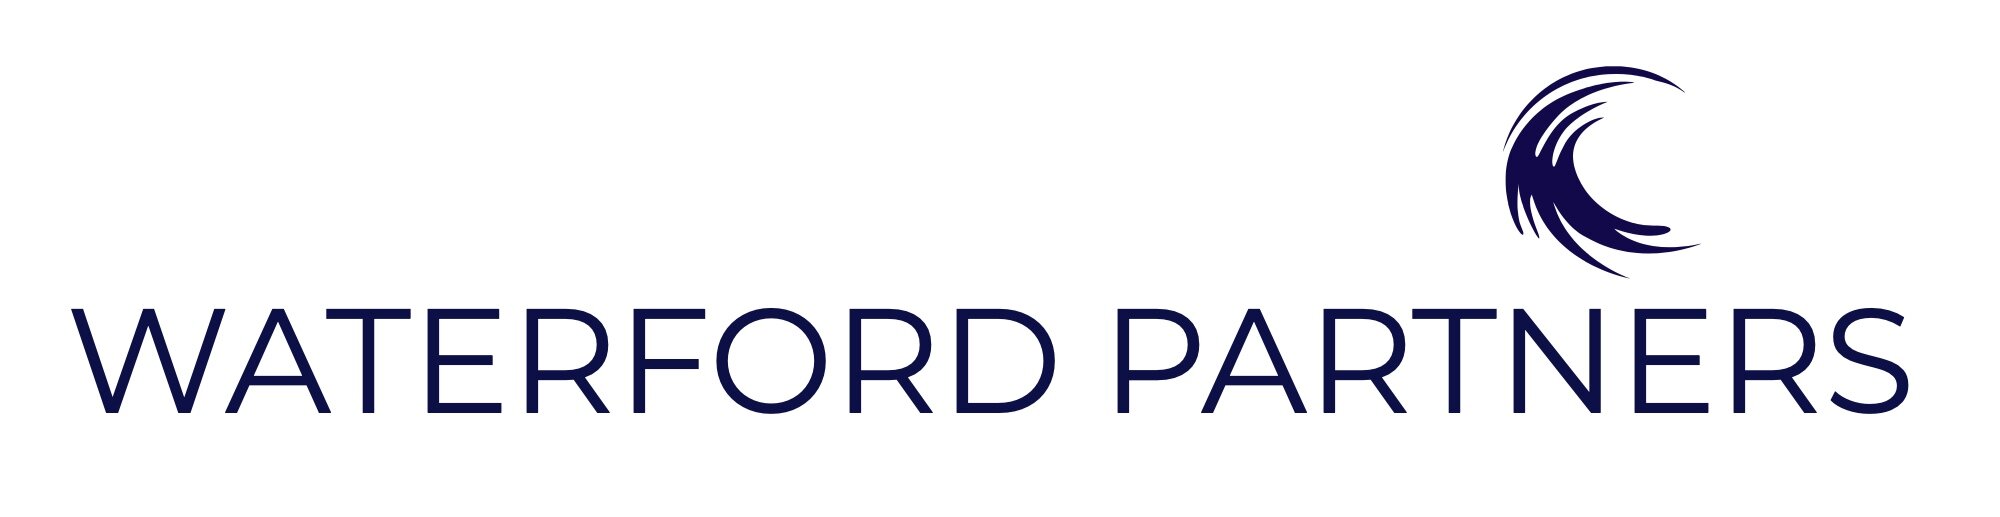 WATERFORD PARTNERS